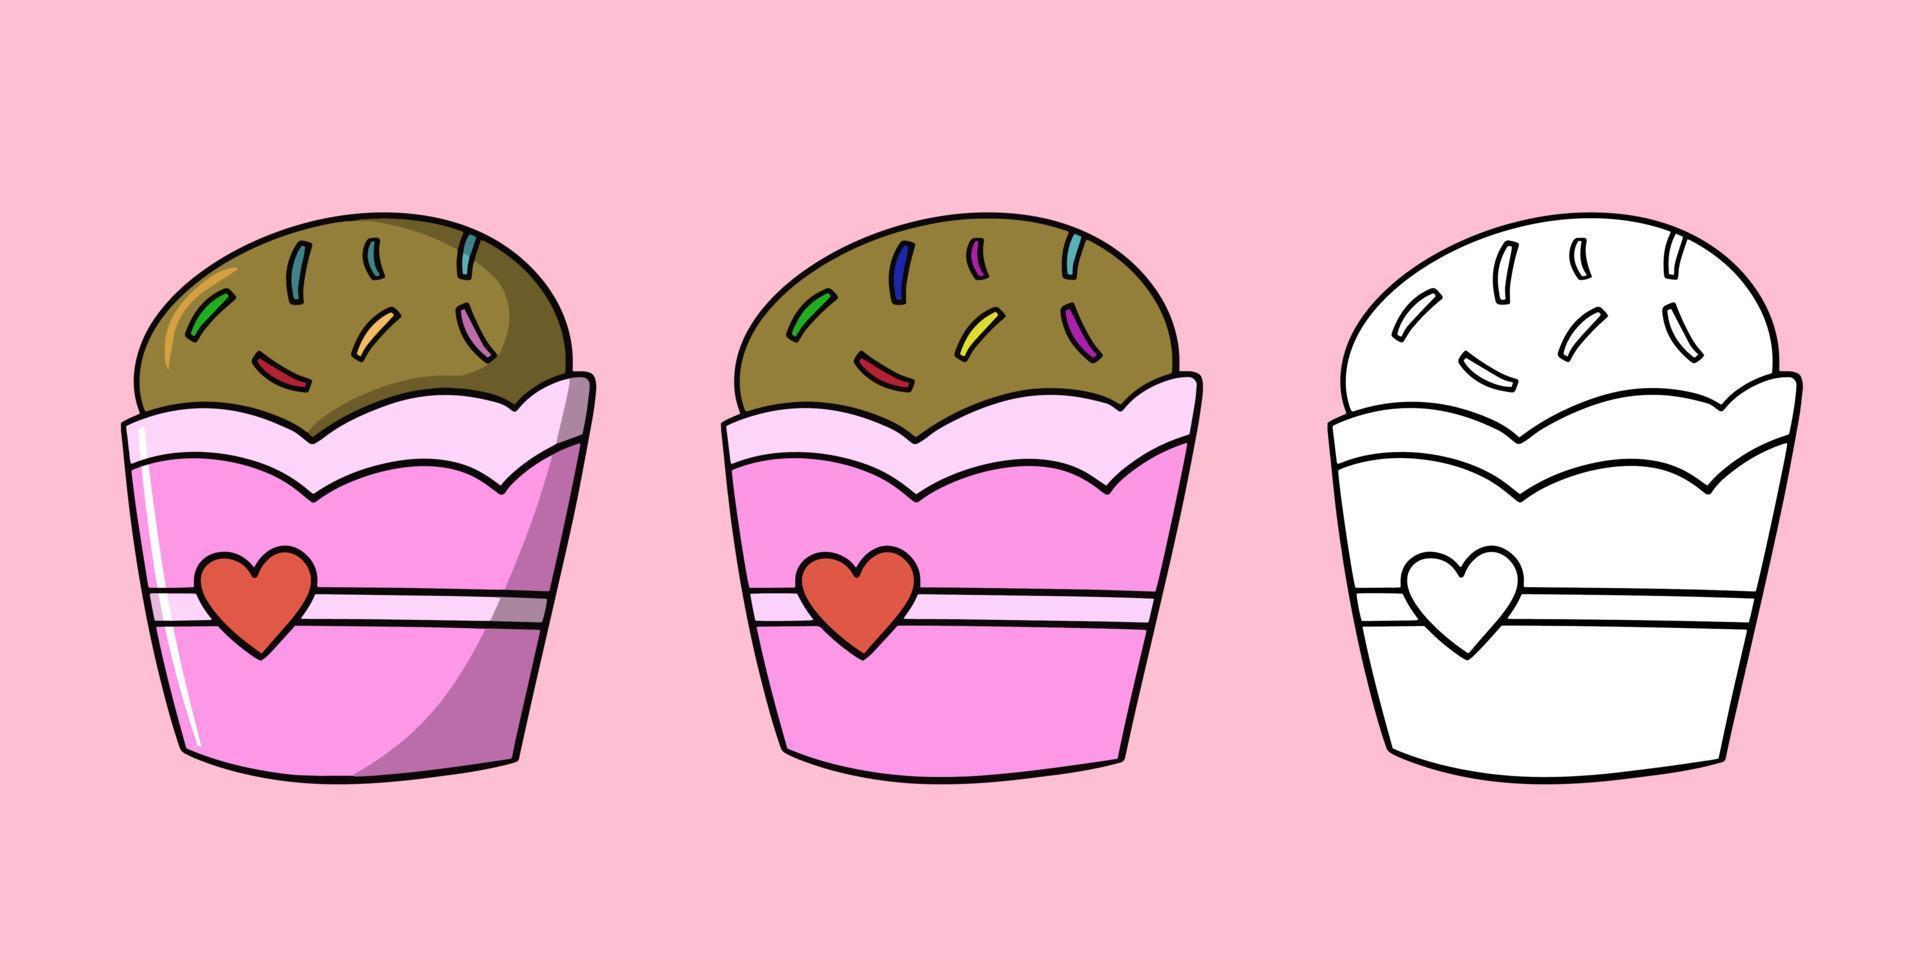 Horizontal set of images, delicious cupcake with sugar crumbs and a heart in a paper cup, vector illustration in cartoon style on a colored background